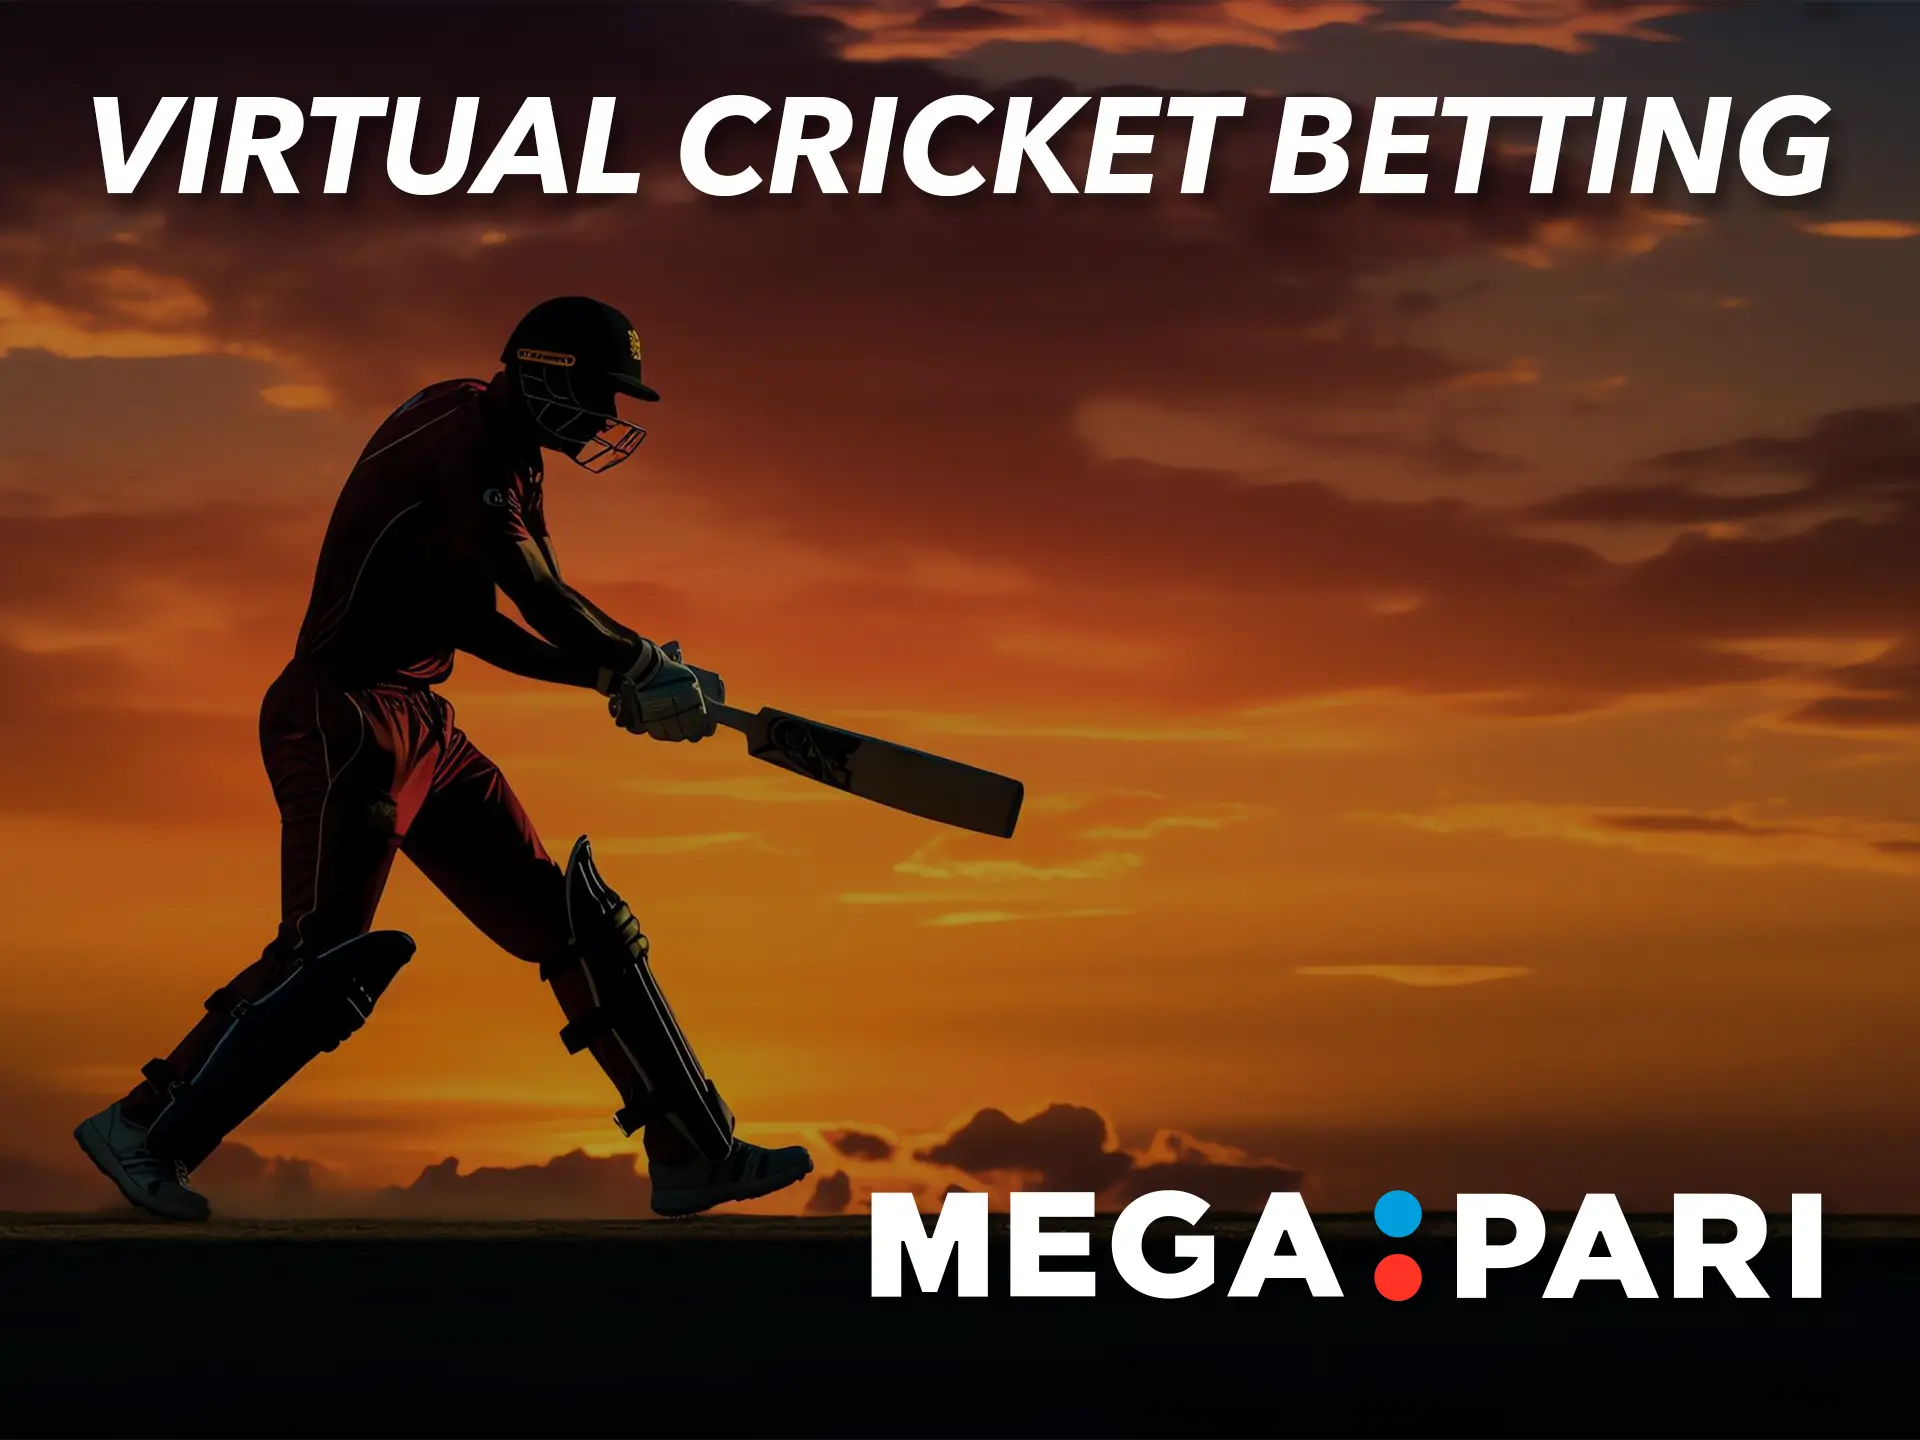 While you are waiting for a cricket match, you can always go in and place a bet in a virtual game.